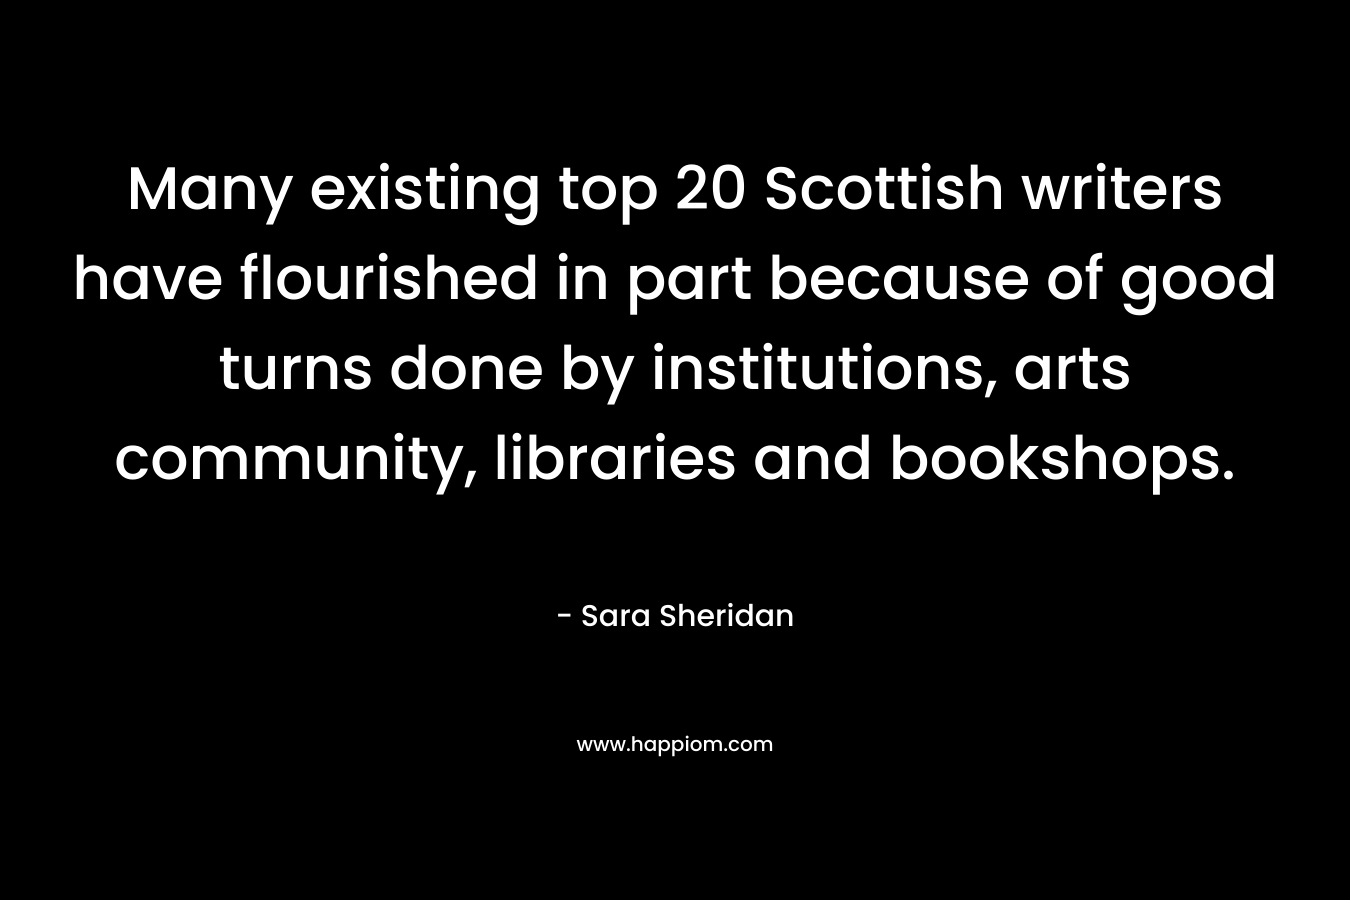 Many existing top 20 Scottish writers have flourished in part because of good turns done by institutions, arts community, libraries and bookshops.